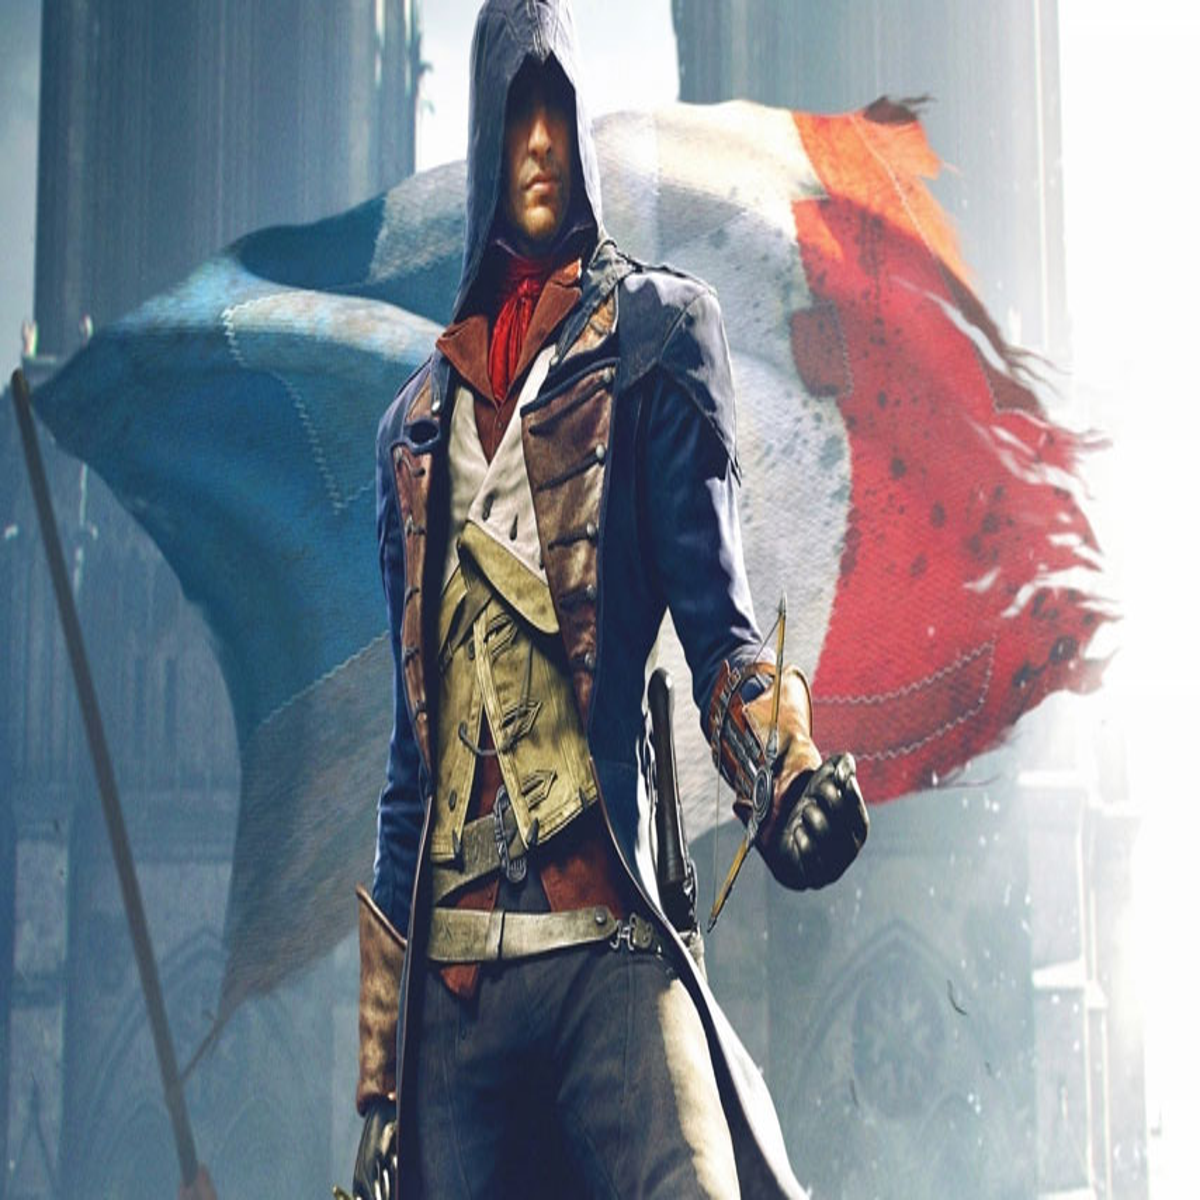 AC Rogue has a Hooded Templar Outfit Mod on PC now! : r/assassinscreed